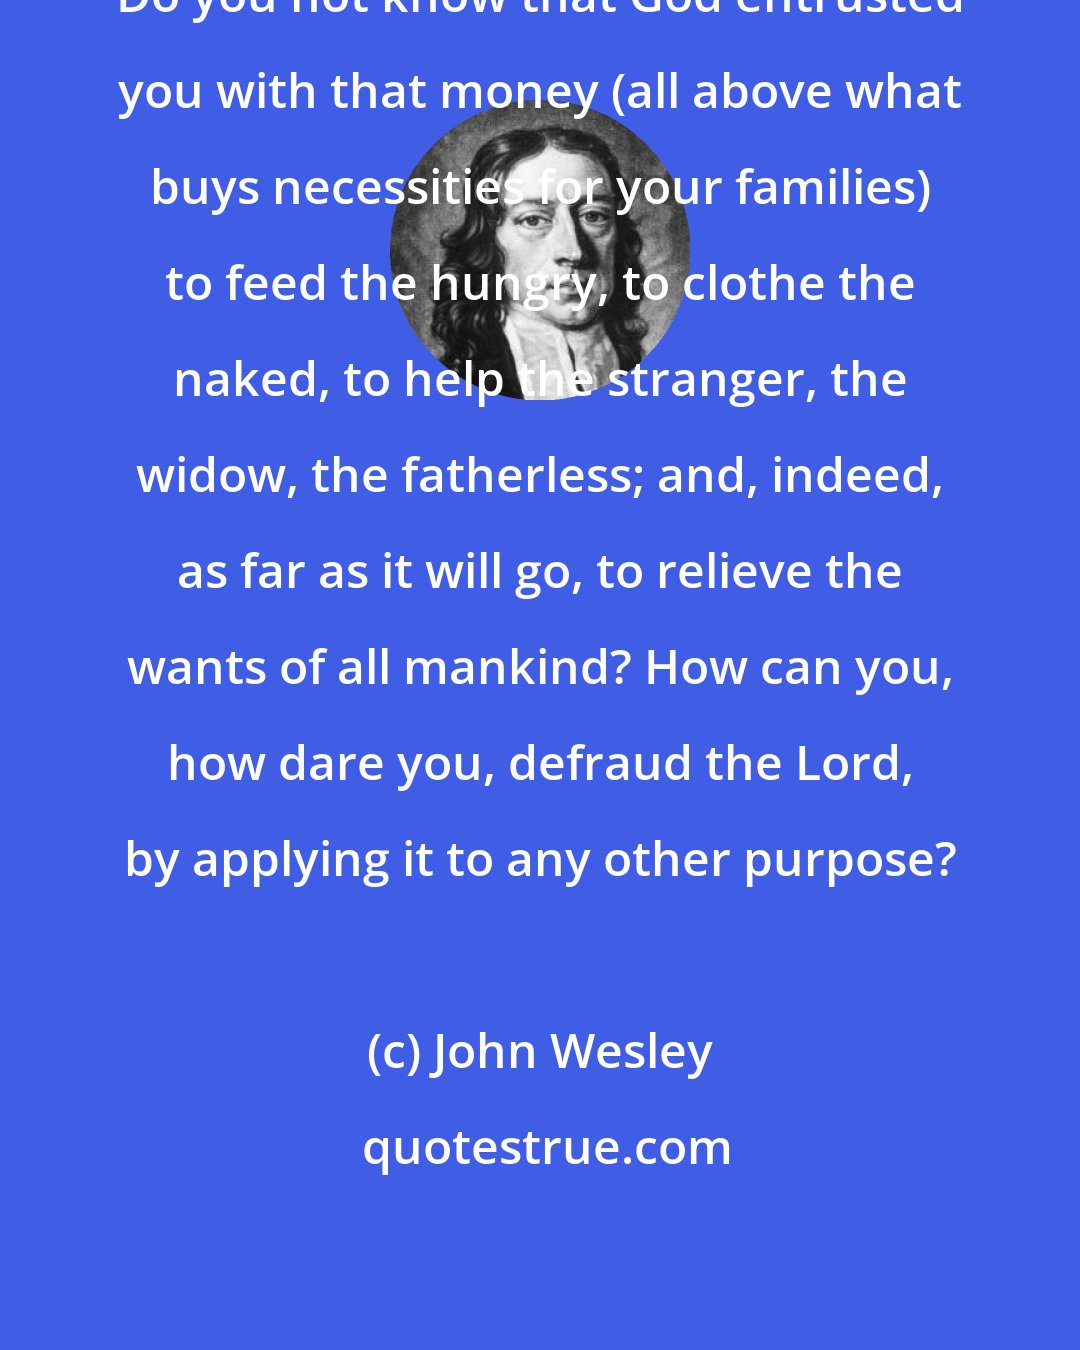 John Wesley: Do you not know that God entrusted you with that money (all above what buys necessities for your families) to feed the hungry, to clothe the naked, to help the stranger, the widow, the fatherless; and, indeed, as far as it will go, to relieve the wants of all mankind? How can you, how dare you, defraud the Lord, by applying it to any other purpose?